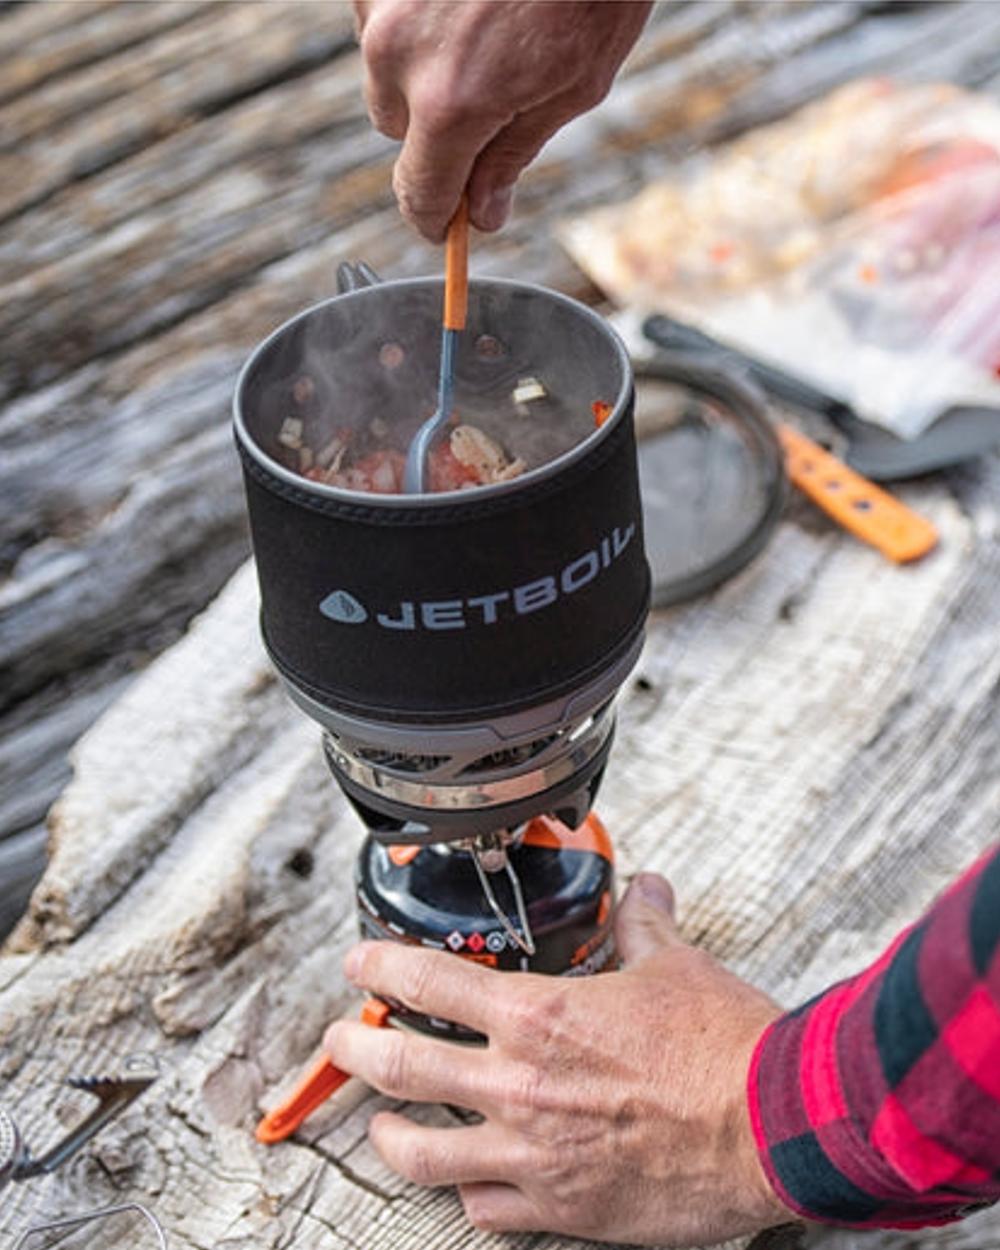 Jetboil MiniMo Cooking System In Carbon 